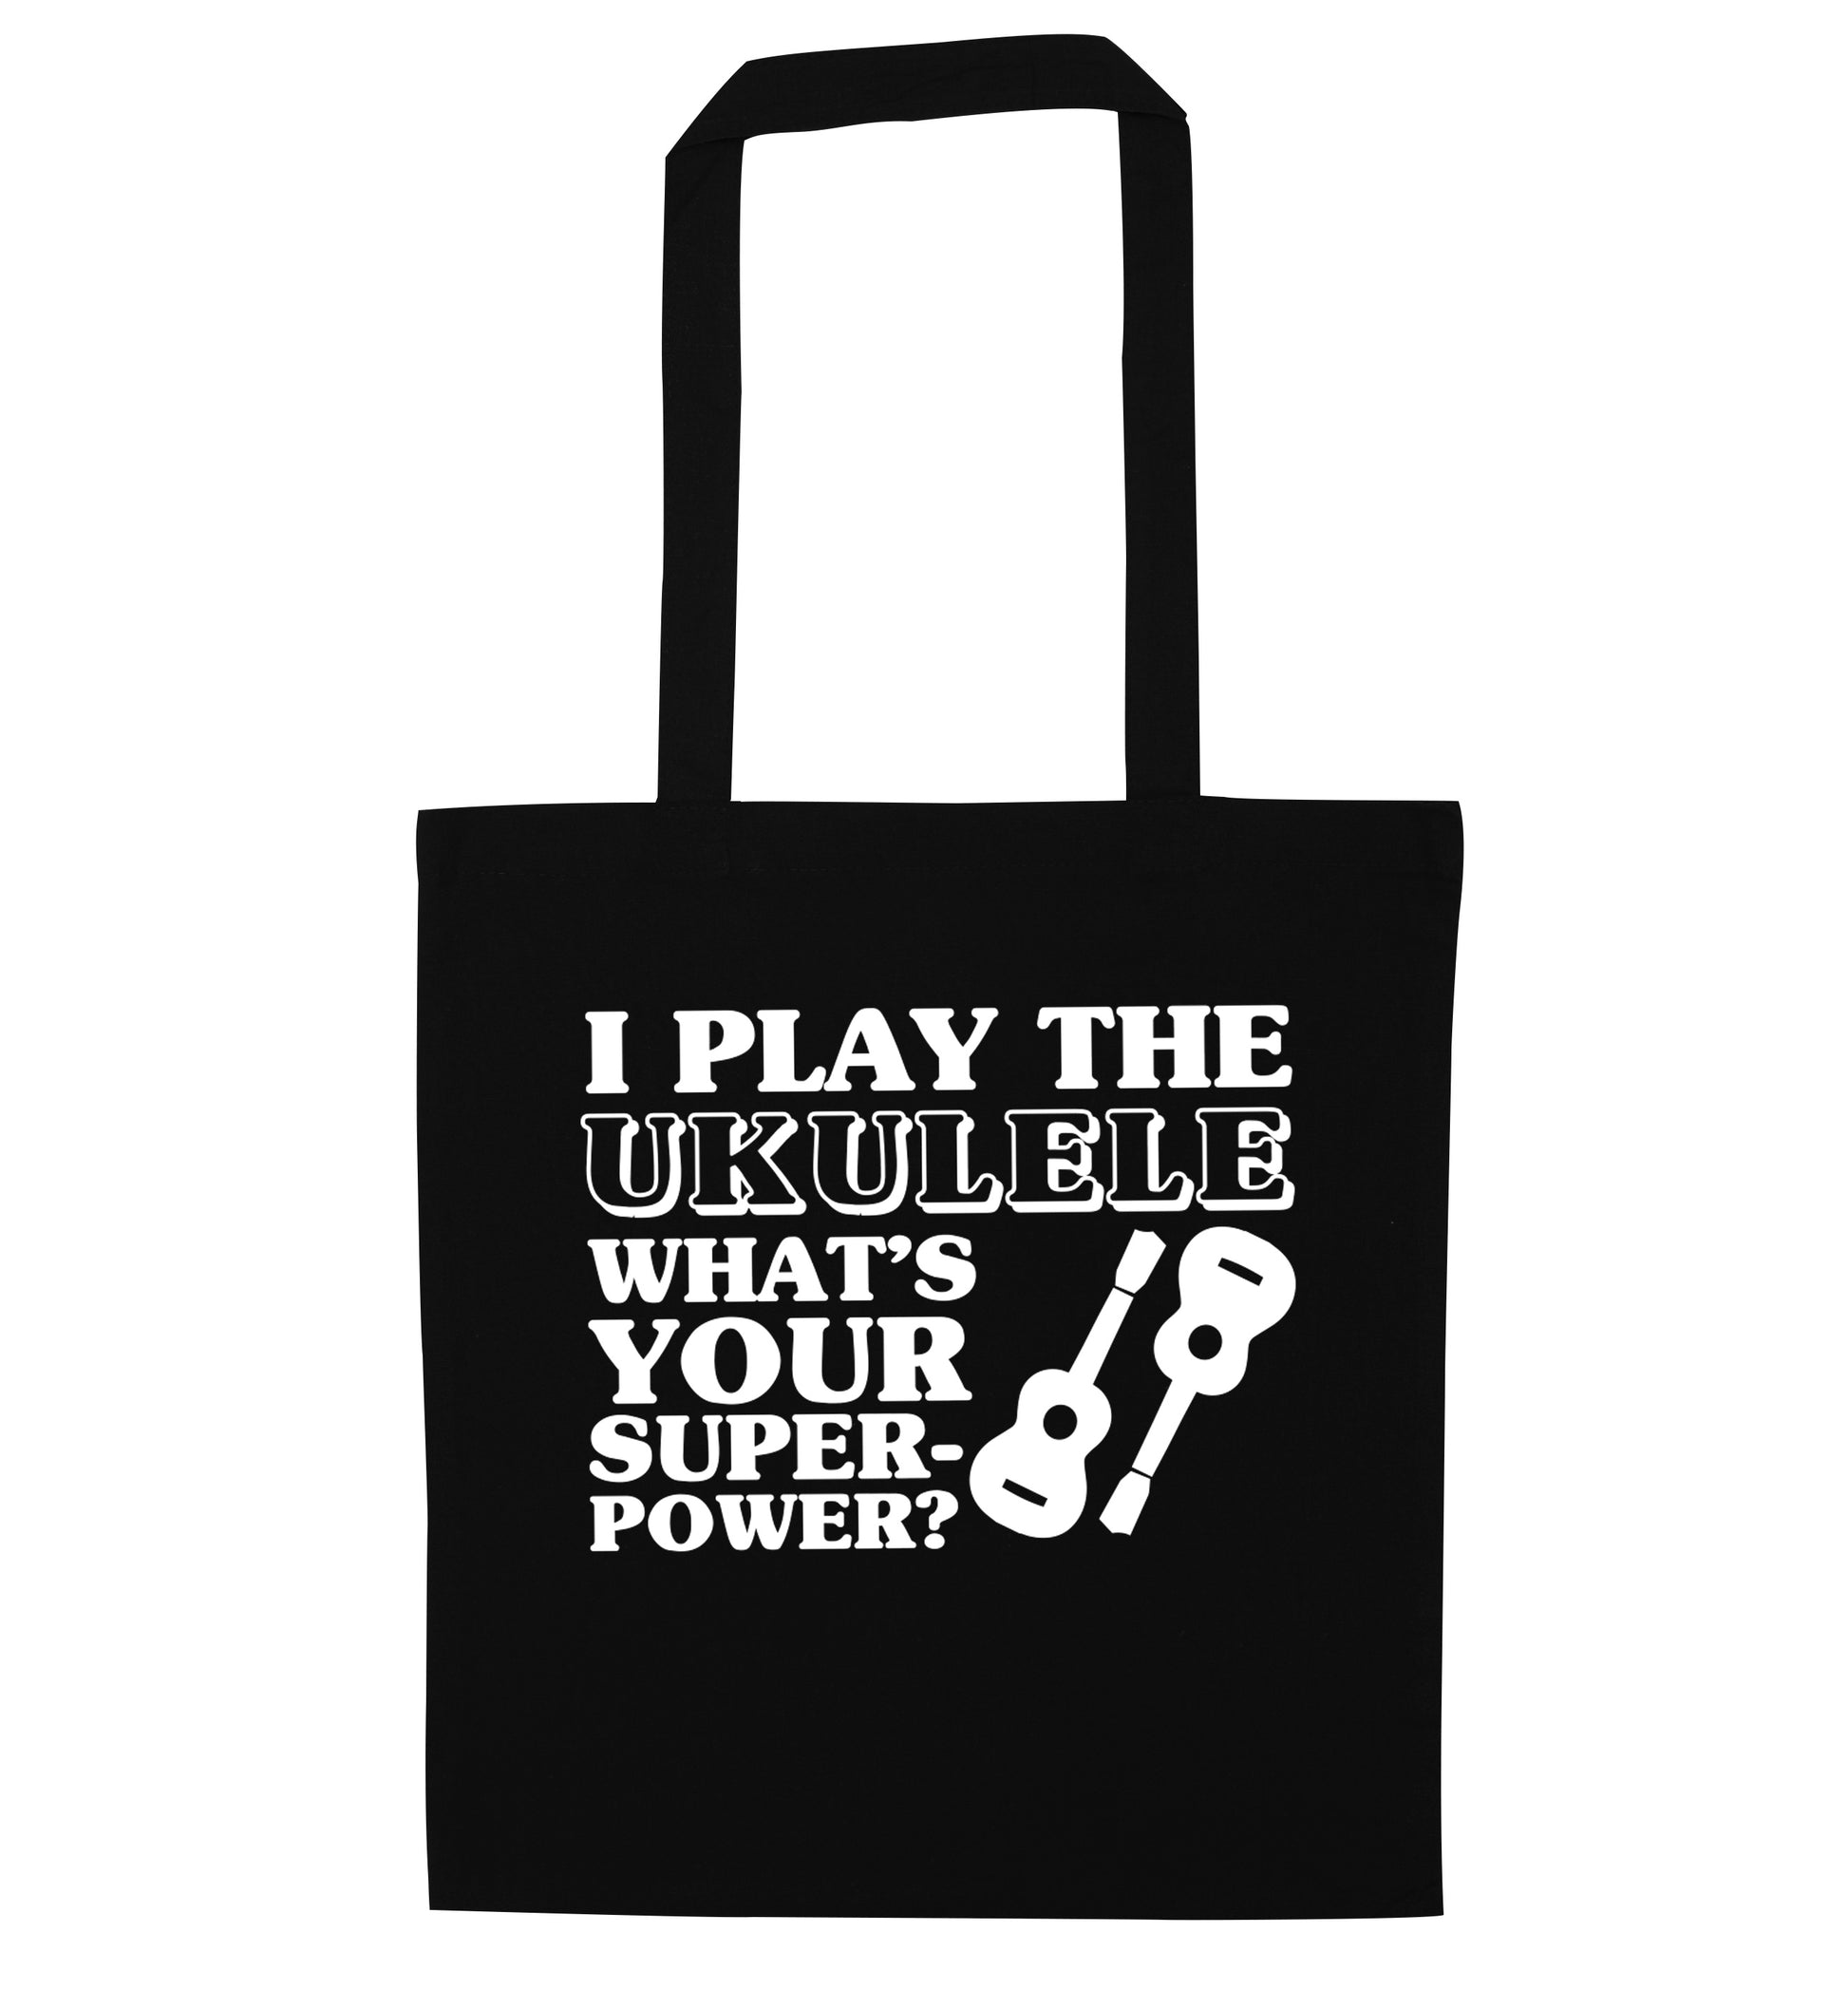 I play the ukulele what's your superpower? black tote bag